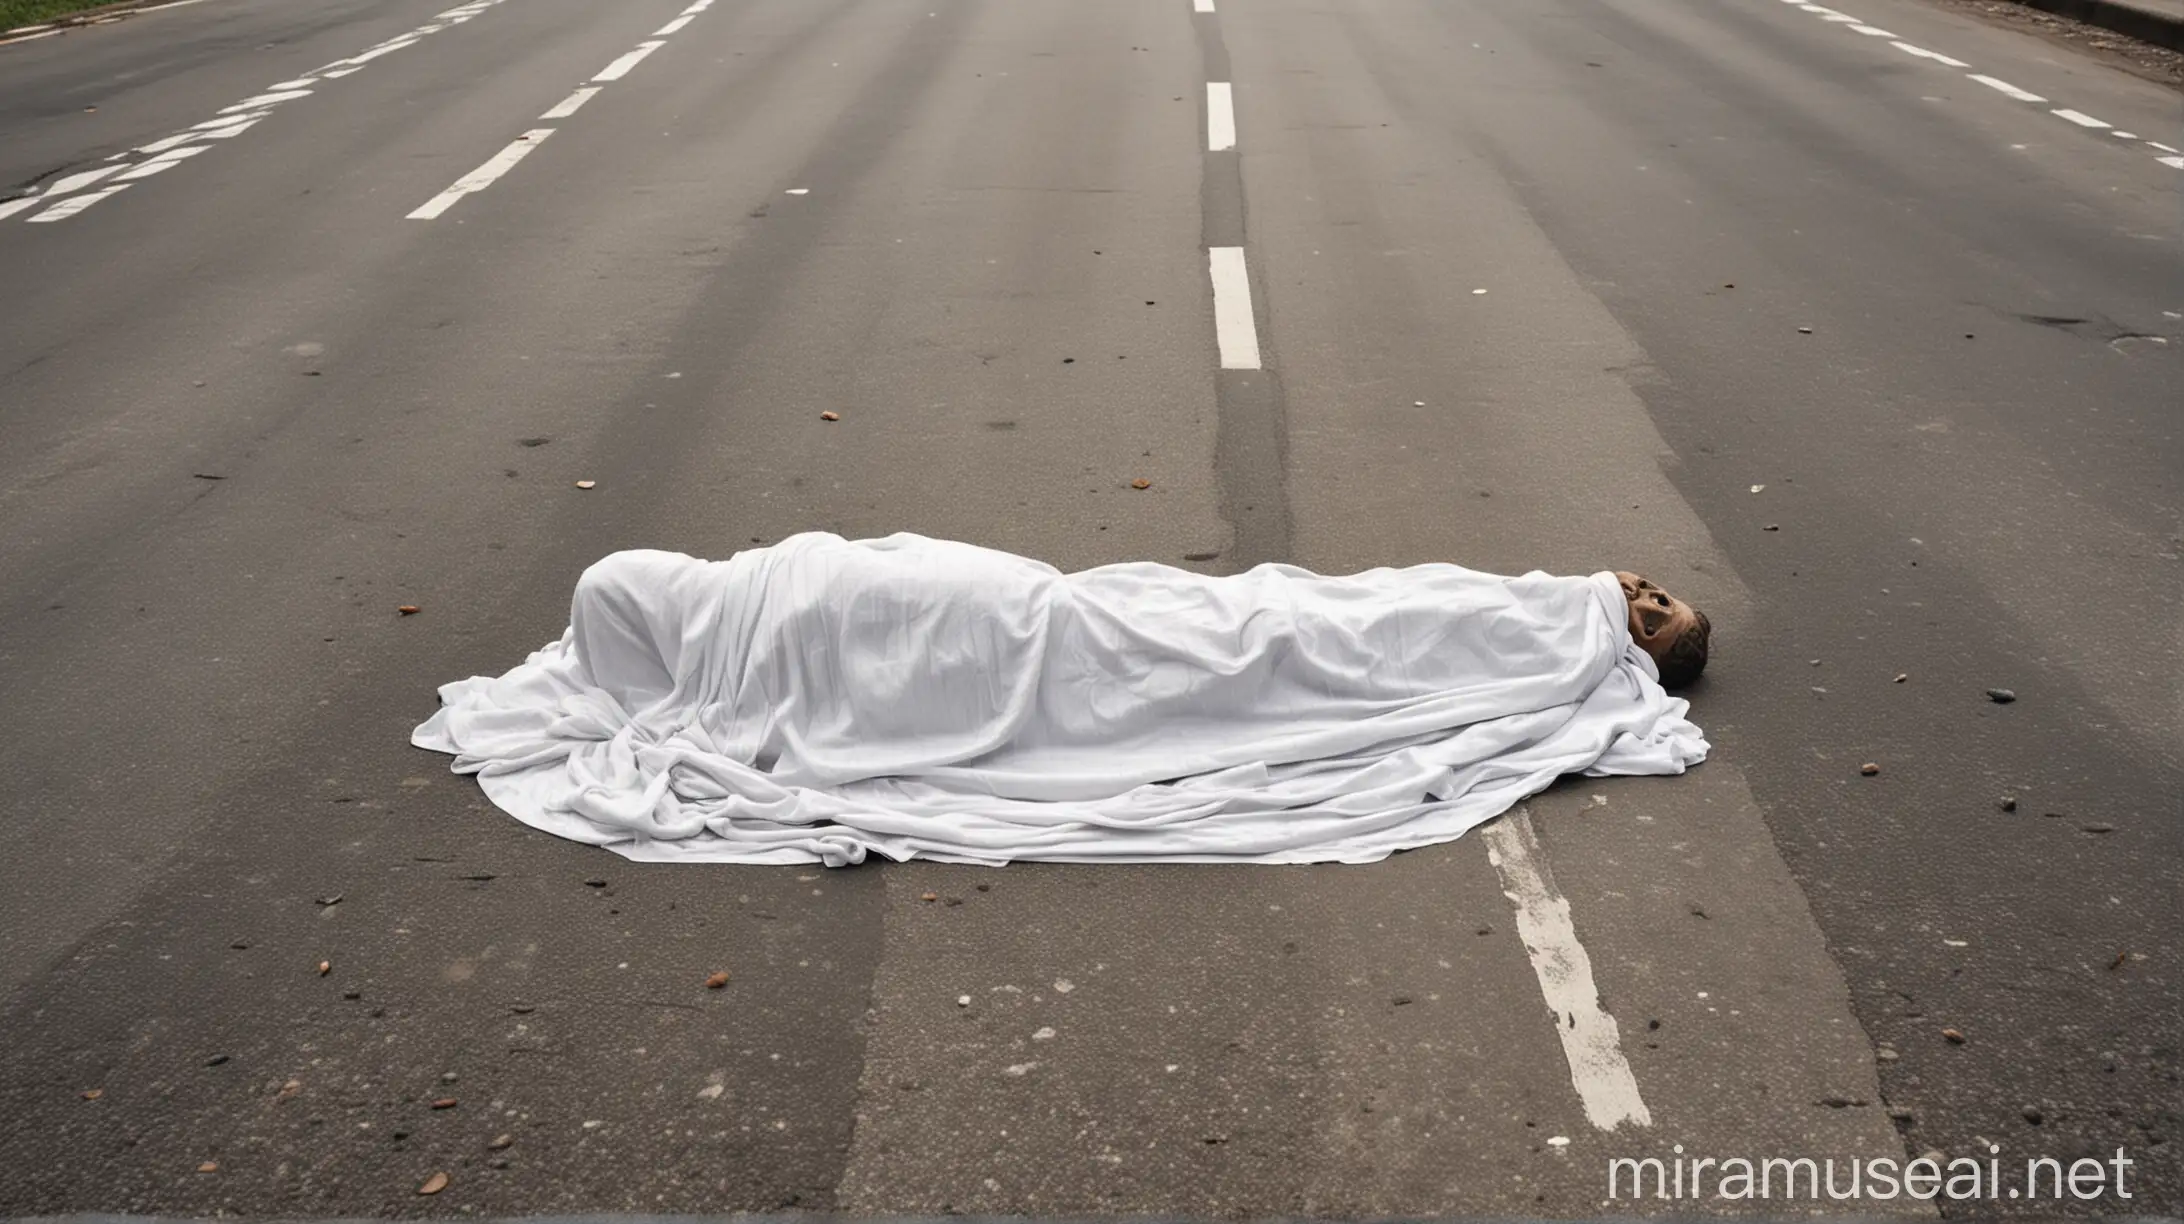 Concept of road accident scene, view of dead body covered under white cloth laying on road